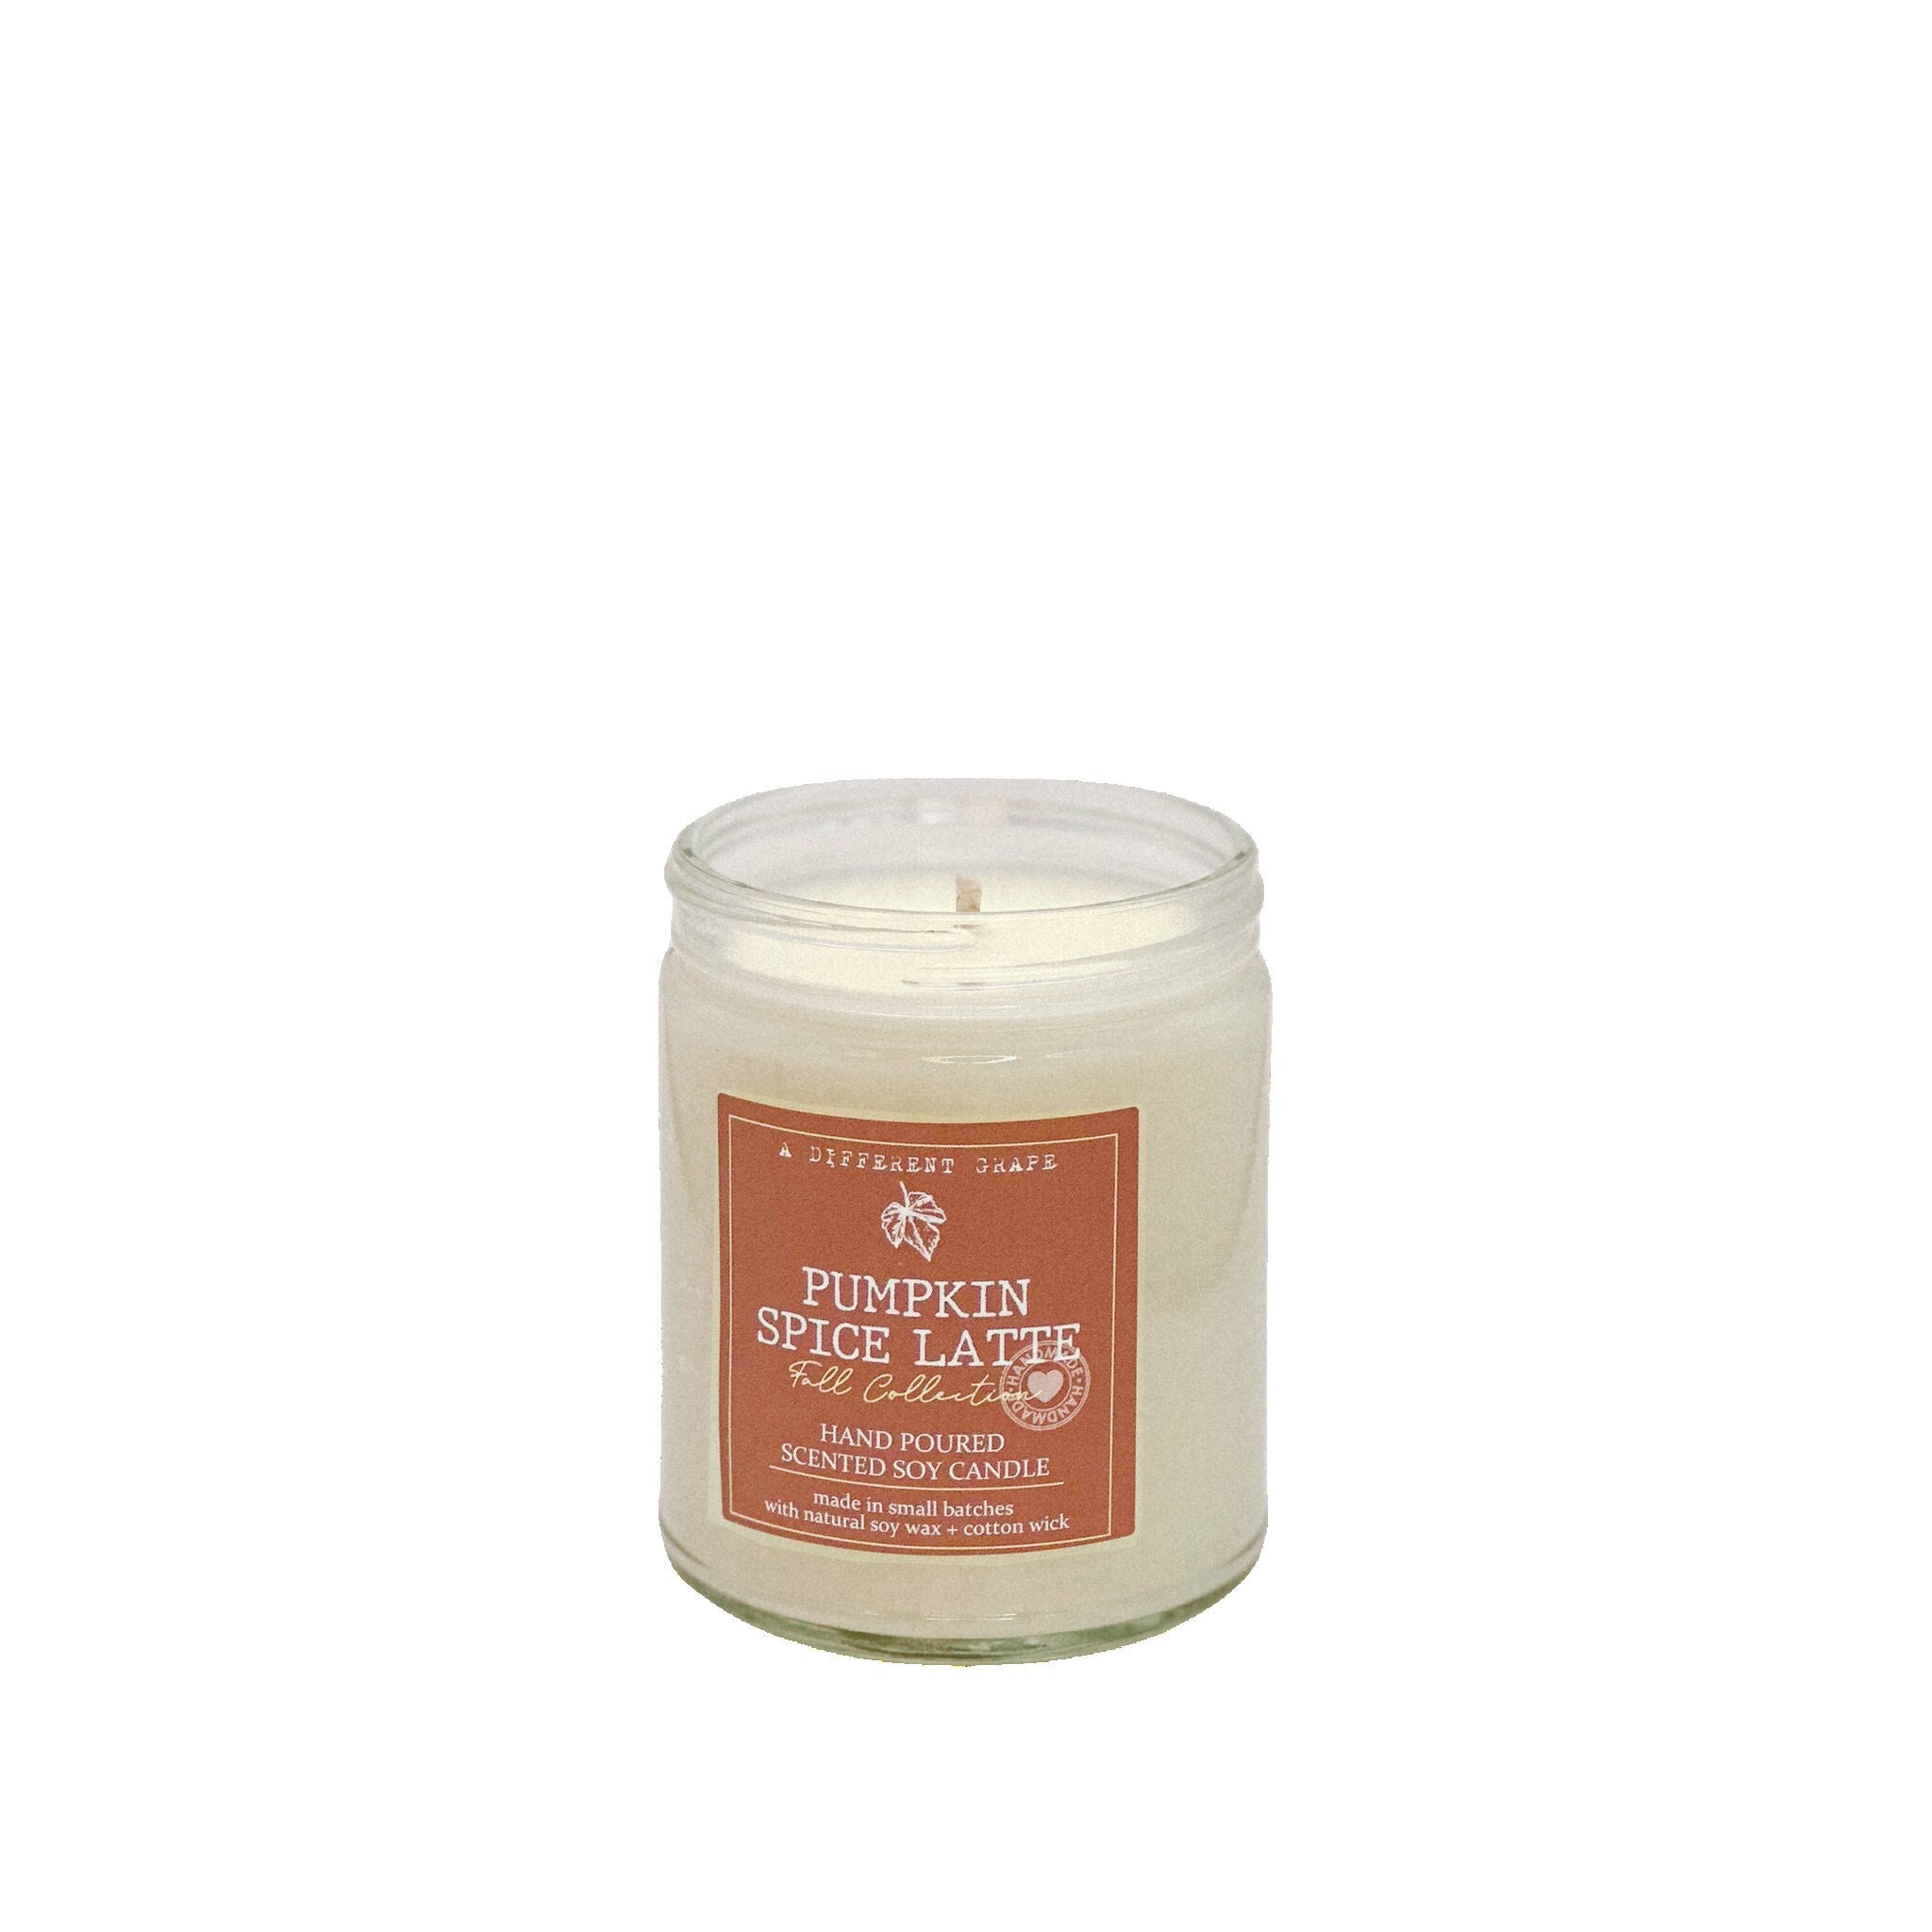 Another Pumpkin Soy Candle - 6oz tin or 8oz glass jar